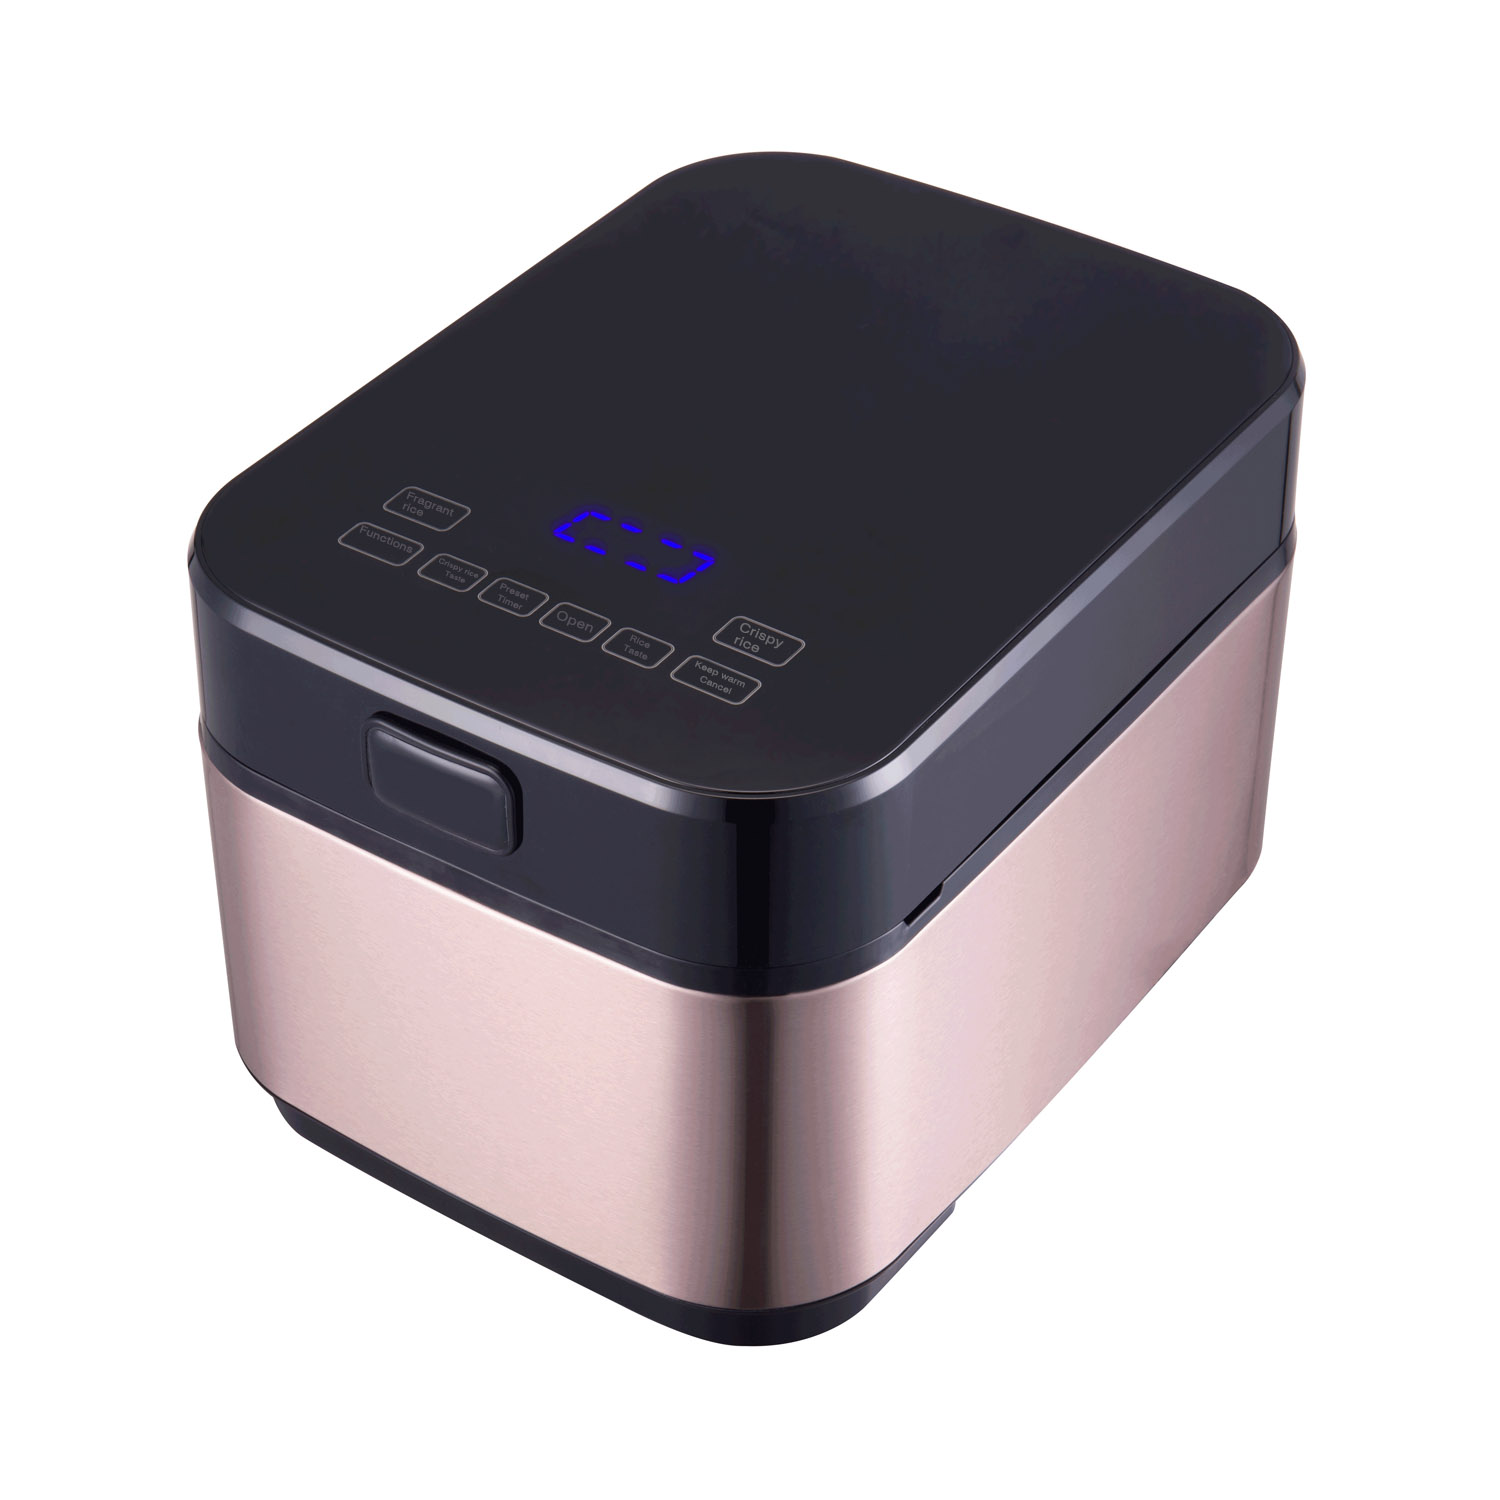 4L Stainless Steel Touch Control Low Sugar Rice Cooker for Diabetic Patient and Fat Person